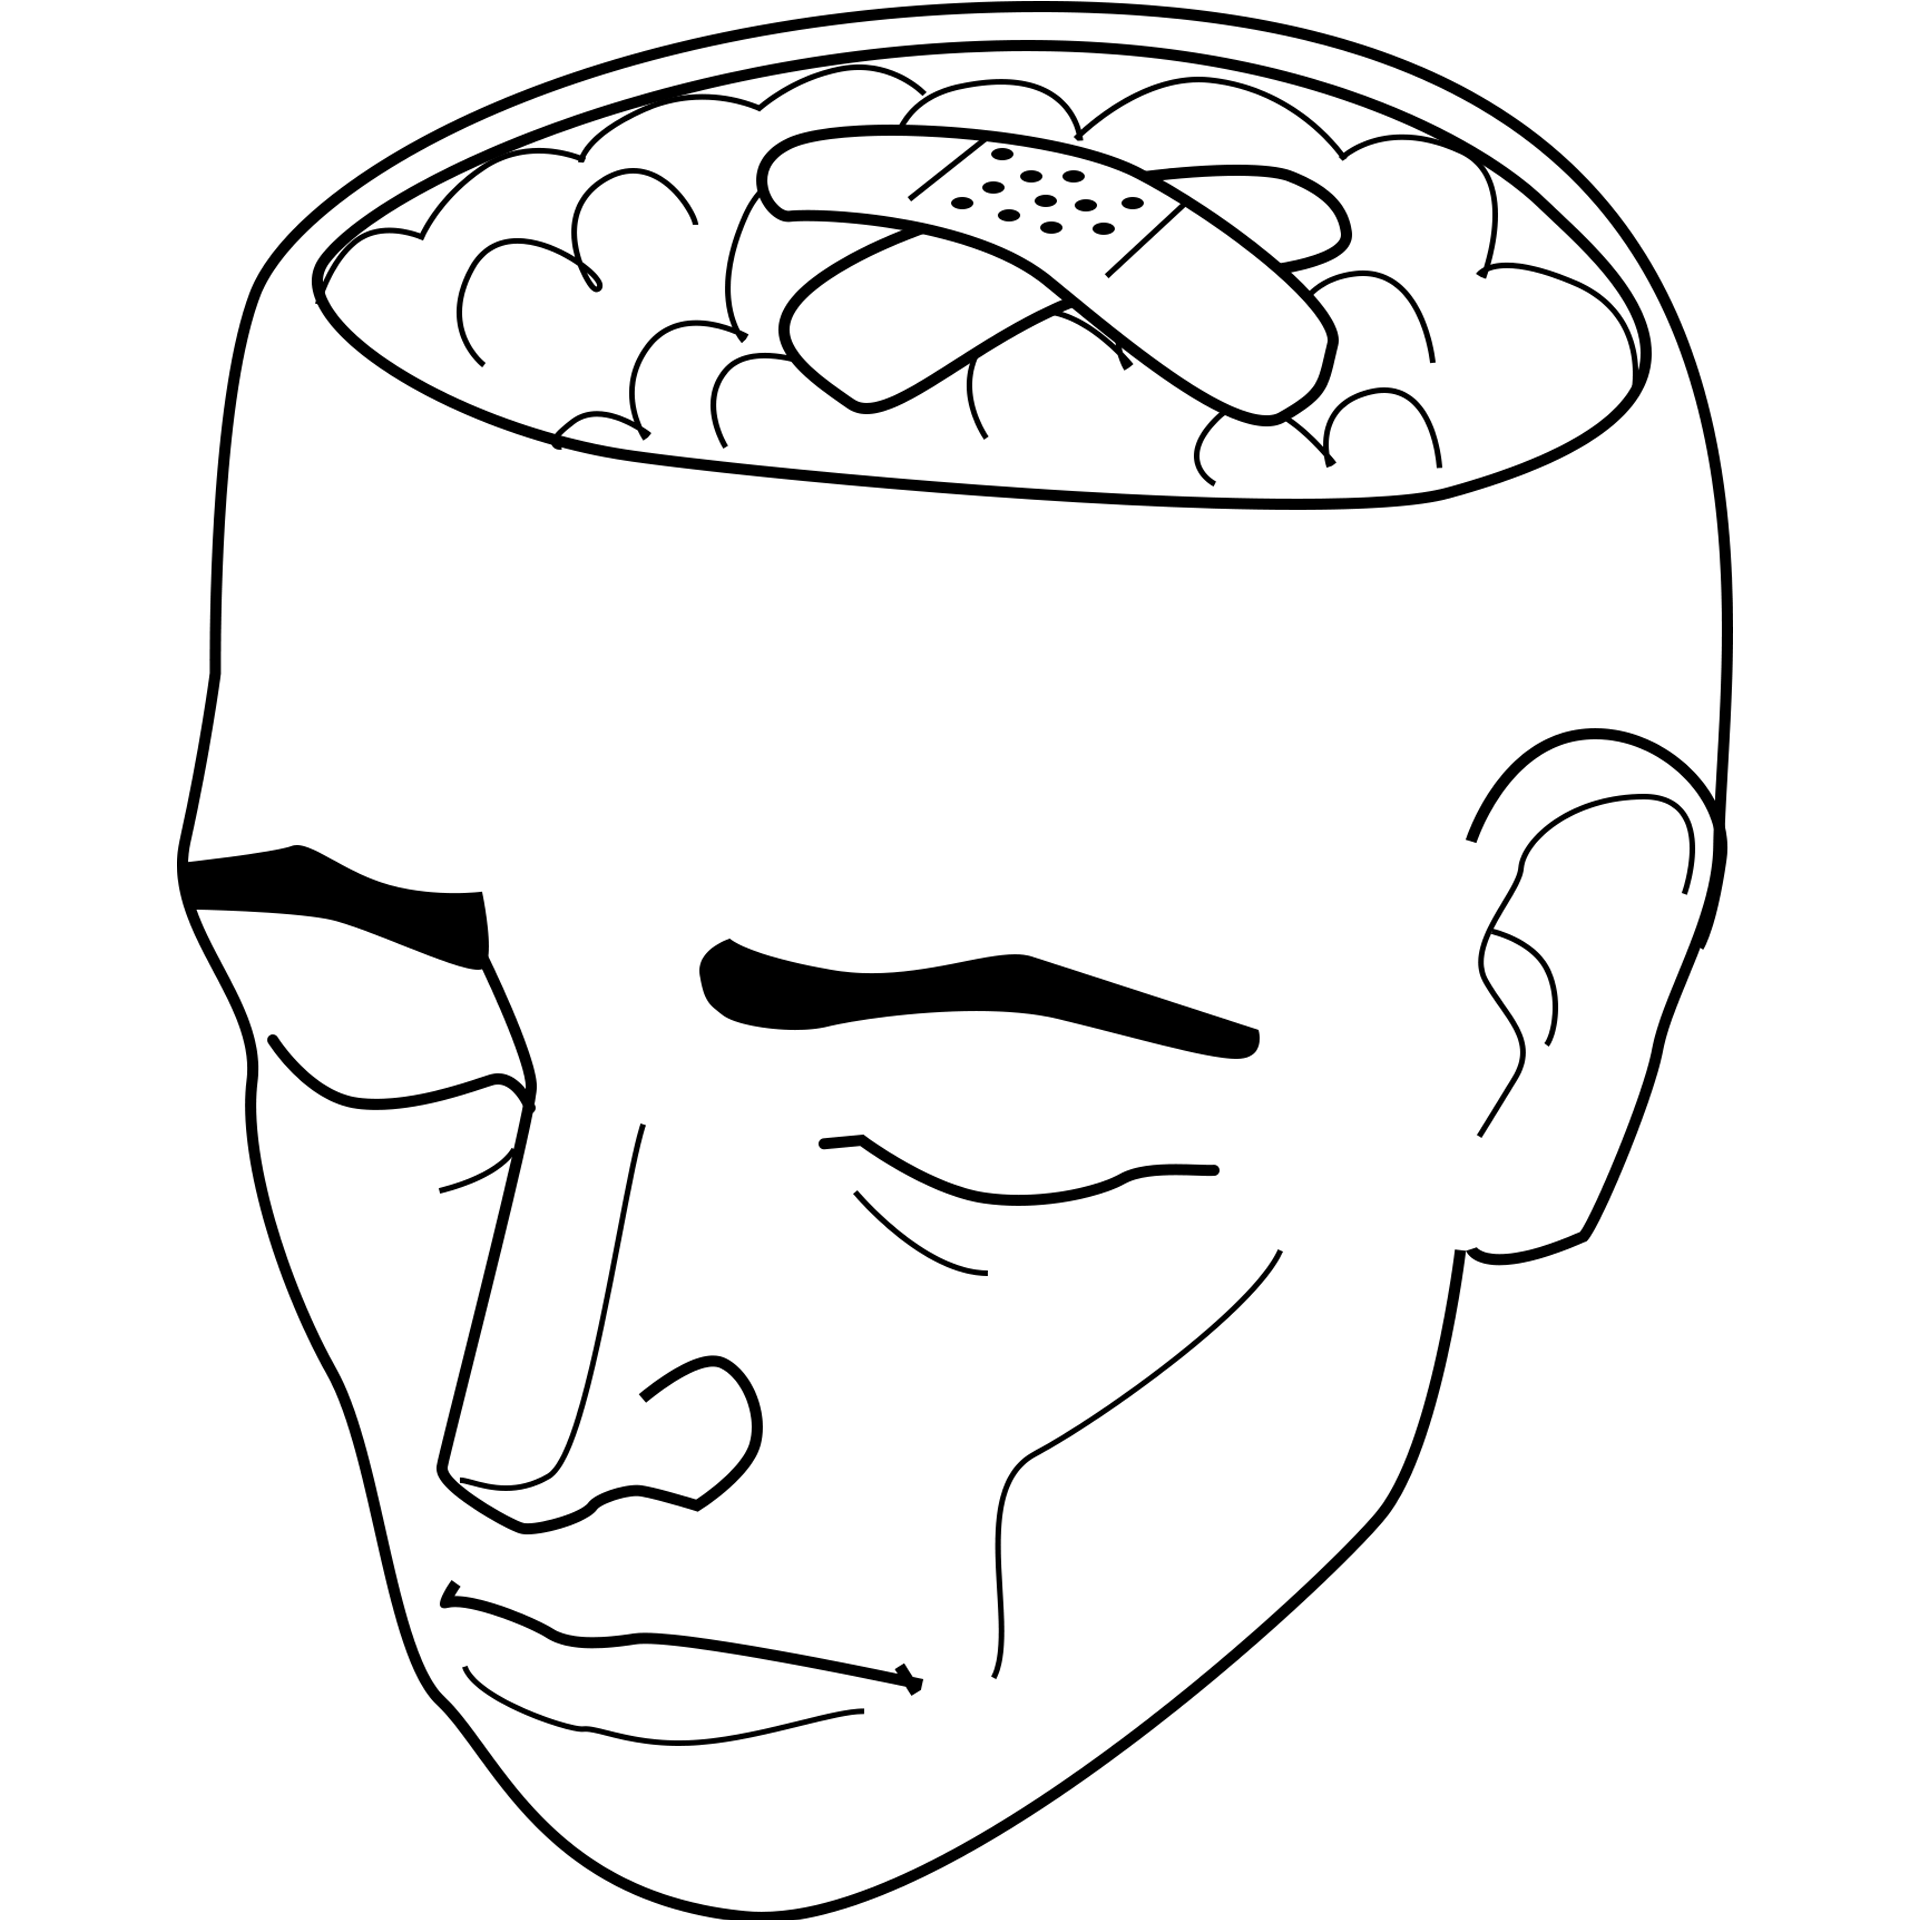 Drawing of a band-aid on brain